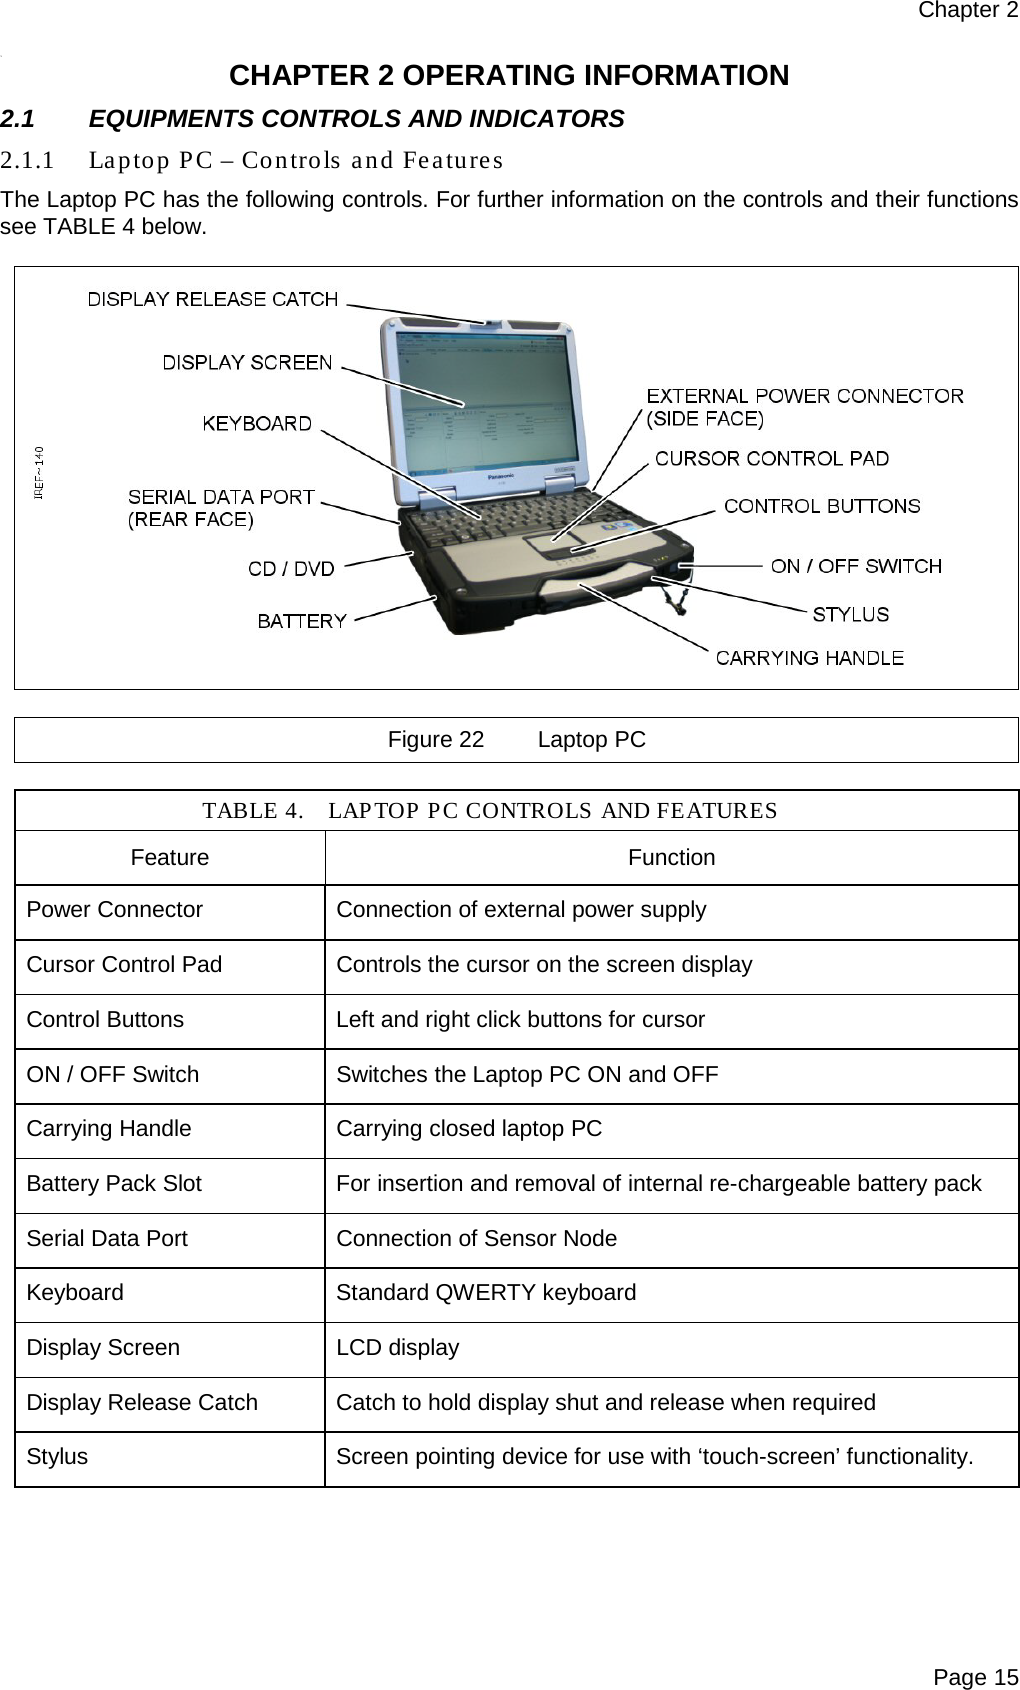 Chapter 2 Page 15 *1  CHAPTER 2 OPERATING INFORMATION 2.1 EQUIPMENTS CONTROLS AND INDICATORS 2.1.1 Laptop PC – Controls and Features The Laptop PC has the following controls. For further information on the controls and their functions see TABLE 4 below.    Figure 22 Laptop PC  TABLE 4. LAP TOP PC CONTROLS AND FEATURES Feature Function Power Connector Connection of external power supply Cursor Control Pad Controls the cursor on the screen display Control Buttons  Left and right click buttons for cursor ON / OFF Switch Switches the Laptop PC ON and OFF Carrying Handle Carrying closed laptop PC Battery Pack Slot For insertion and removal of internal re-chargeable battery pack Serial Data Port Connection of Sensor Node  Keyboard Standard QWERTY keyboard Display Screen LCD display Display Release Catch  Catch to hold display shut and release when required Stylus  Screen pointing device for use with ‘touch-screen’ functionality.  